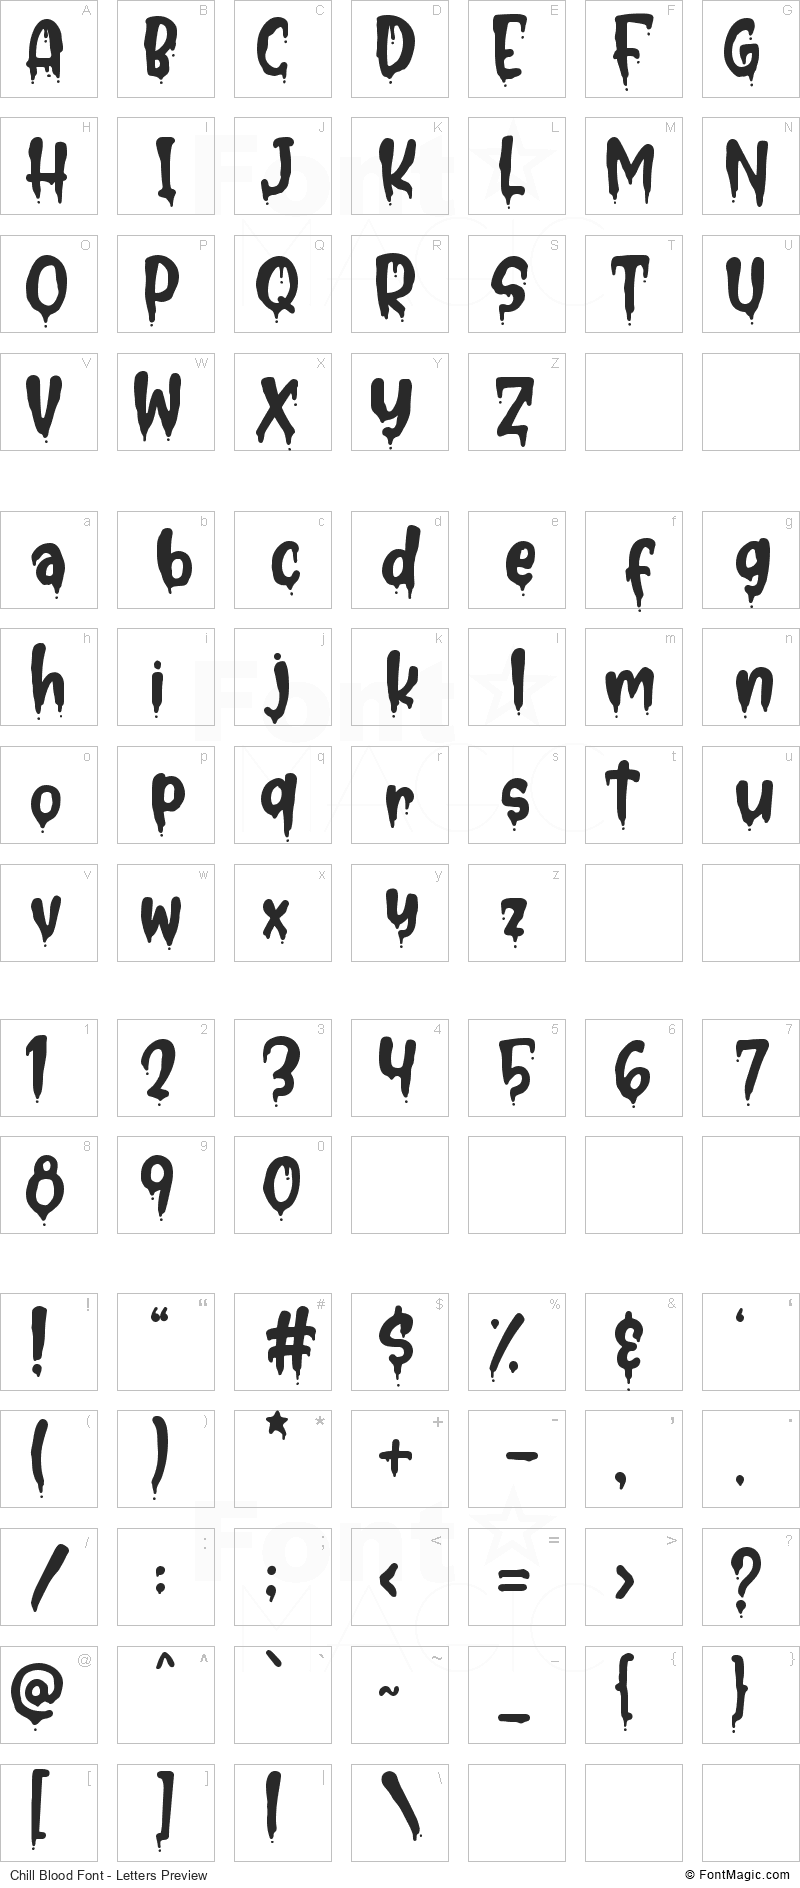 Chill Blood Font - All Latters Preview Chart